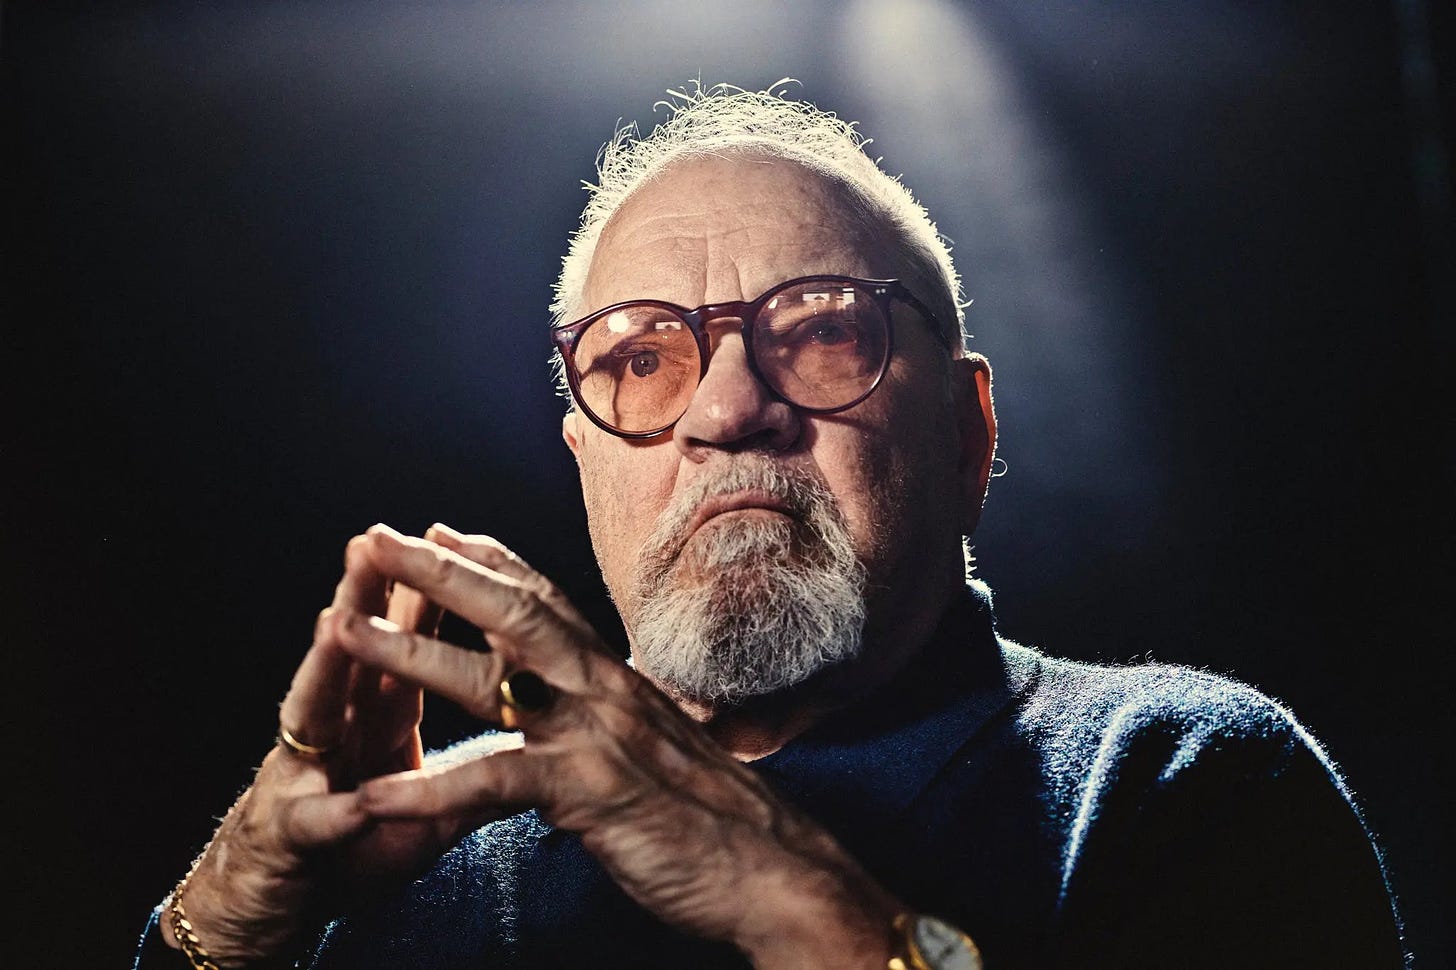 Film Updates on X: "Paul Schrader names his own film 'MASTER GARDENER' as  one of his favorite films of 2023 in addition to: • Oppenheimer • Barbie •  American Fiction • Maestro •